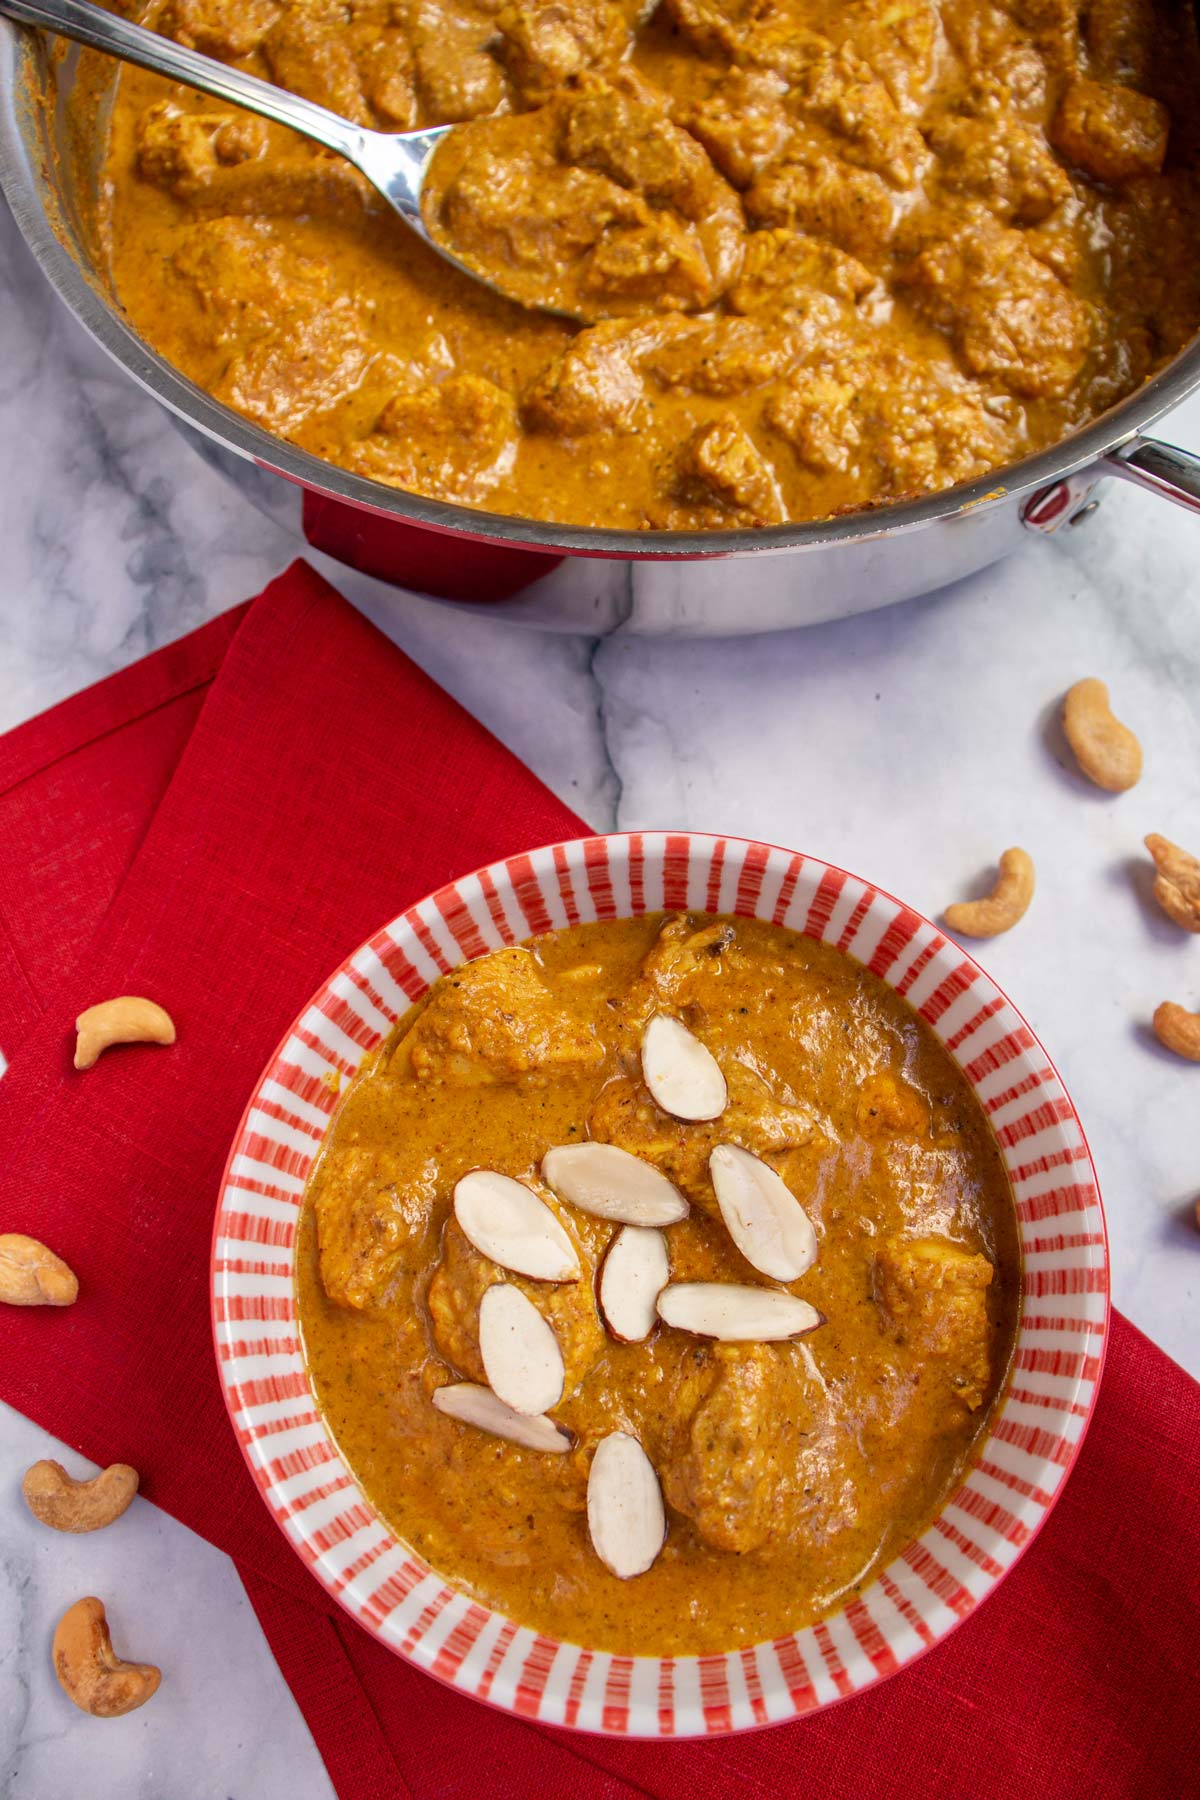 Chicken korma with sliced almonds in a red and white bowl on a red napkin.